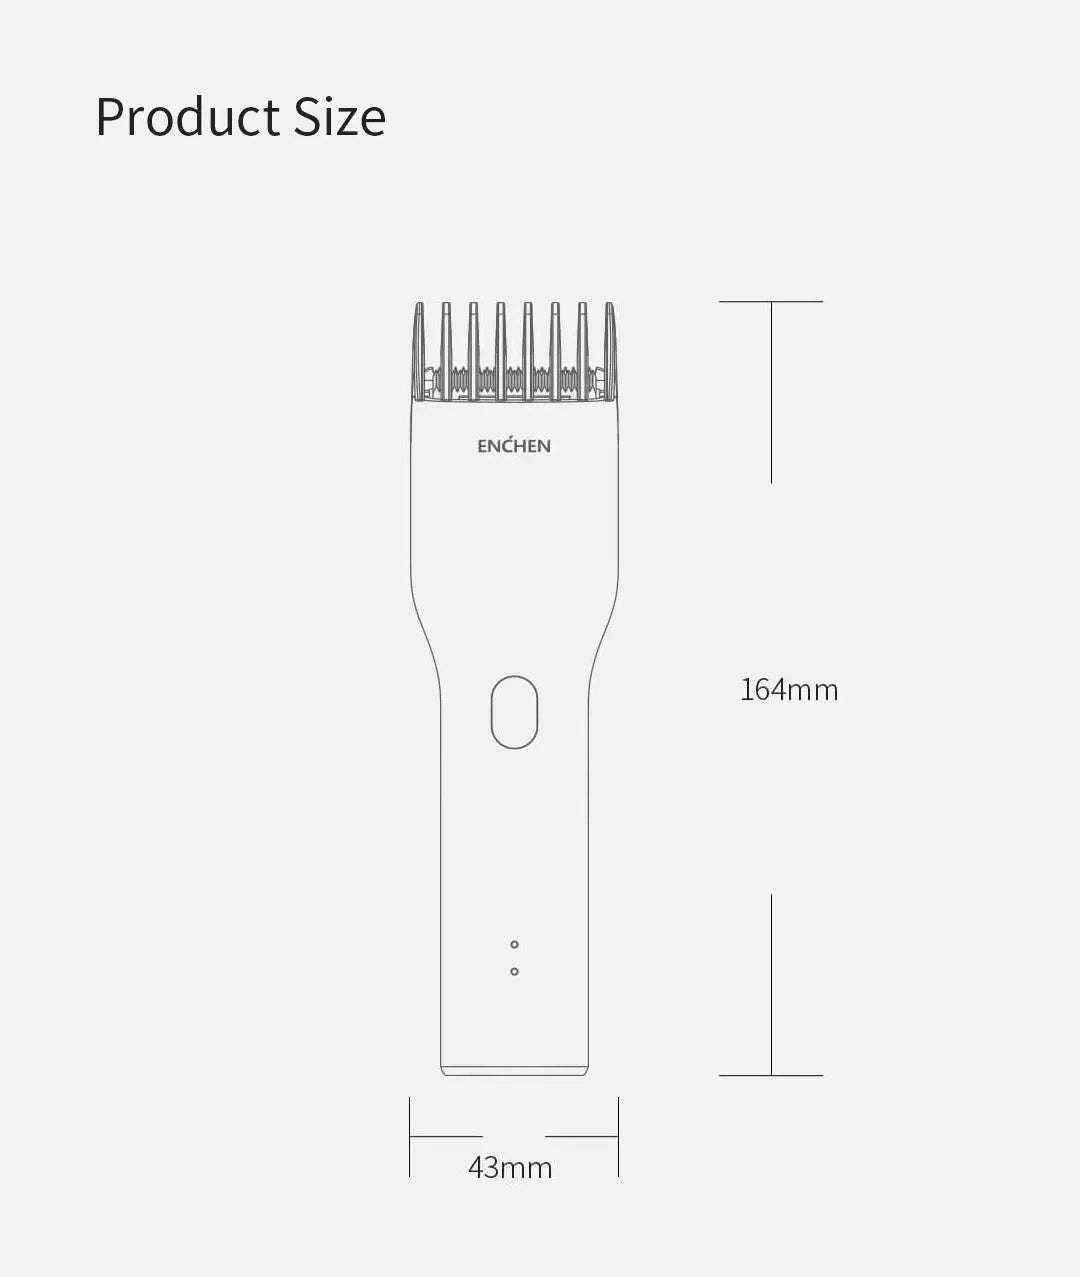 ENCHEN Boost USB Electric Hair Clippers Trimmers